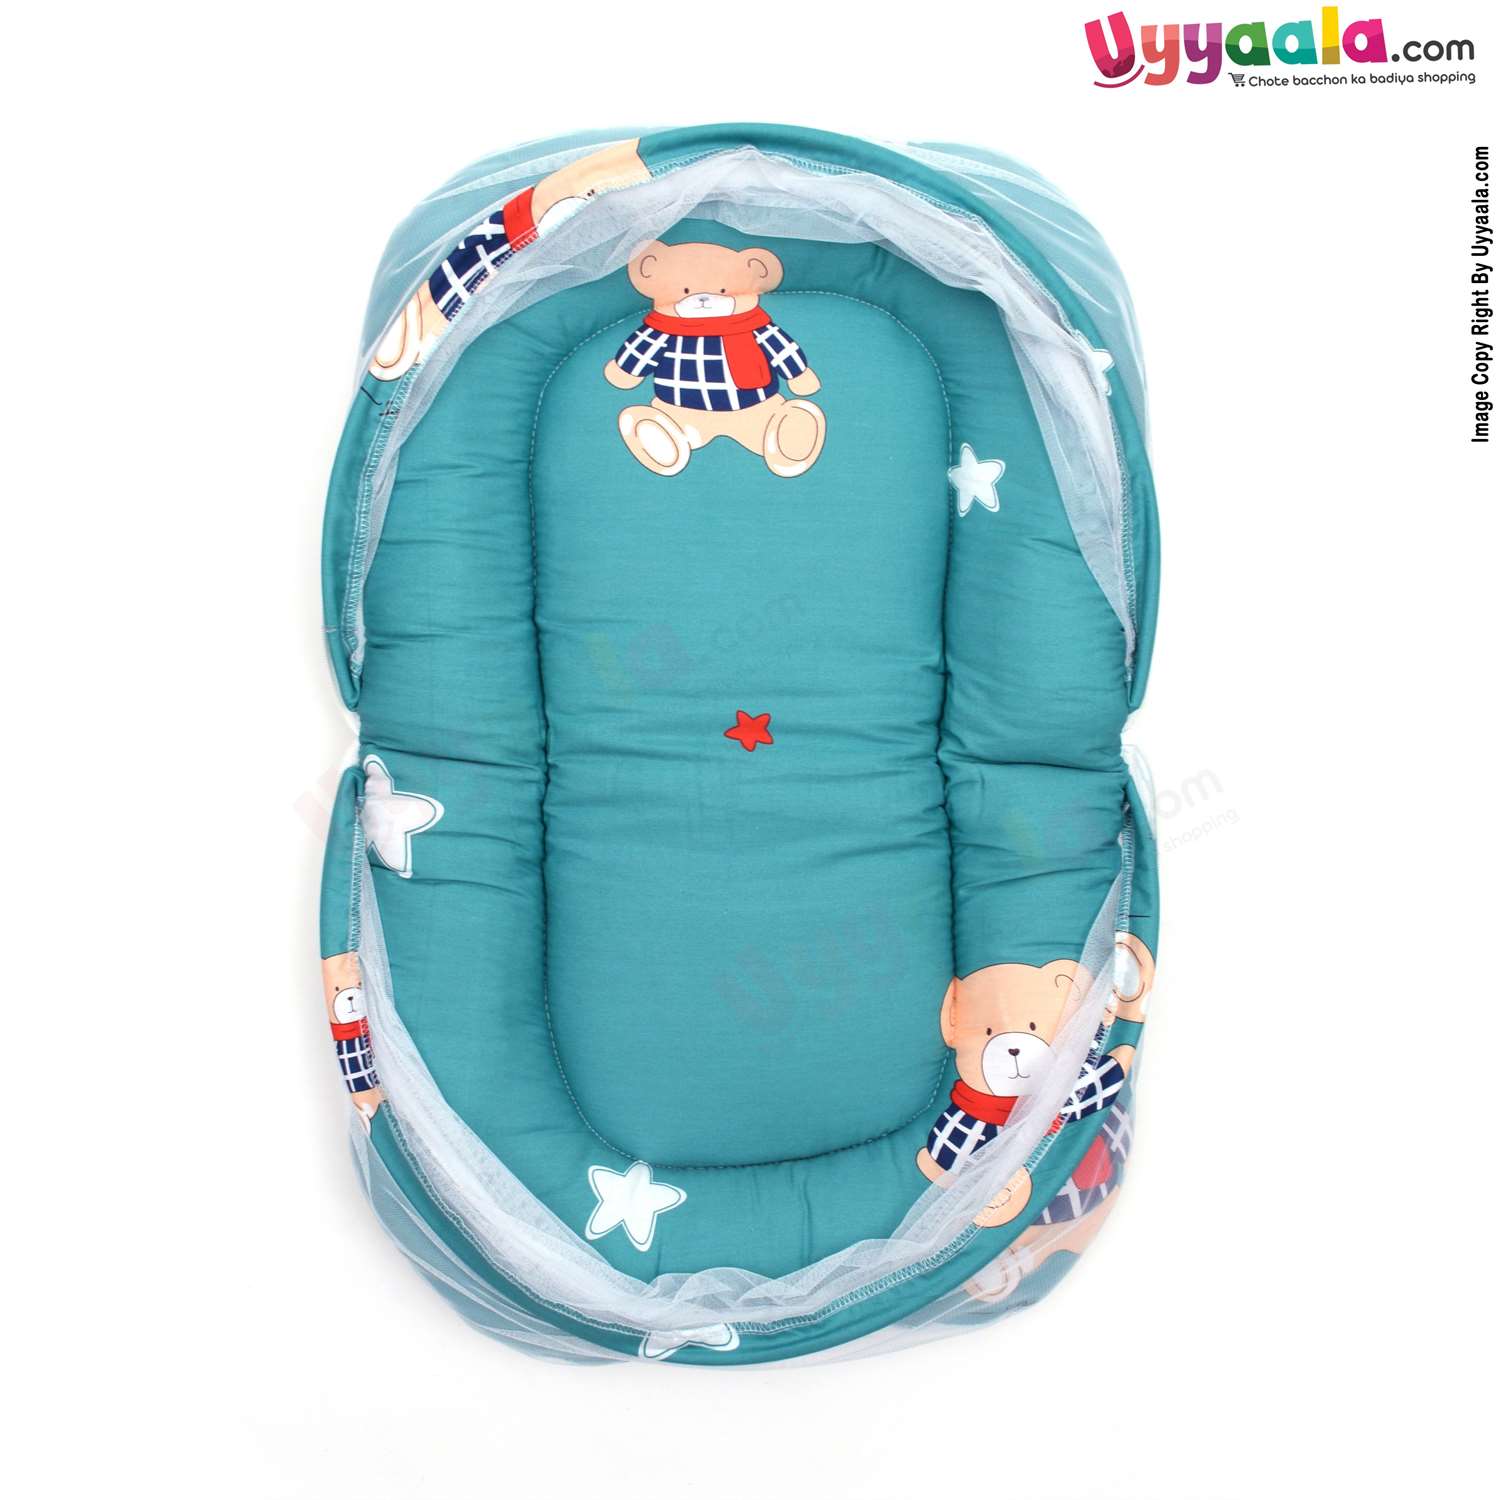 Baby Bedding Set with Mosquito Protection Net & Pillow